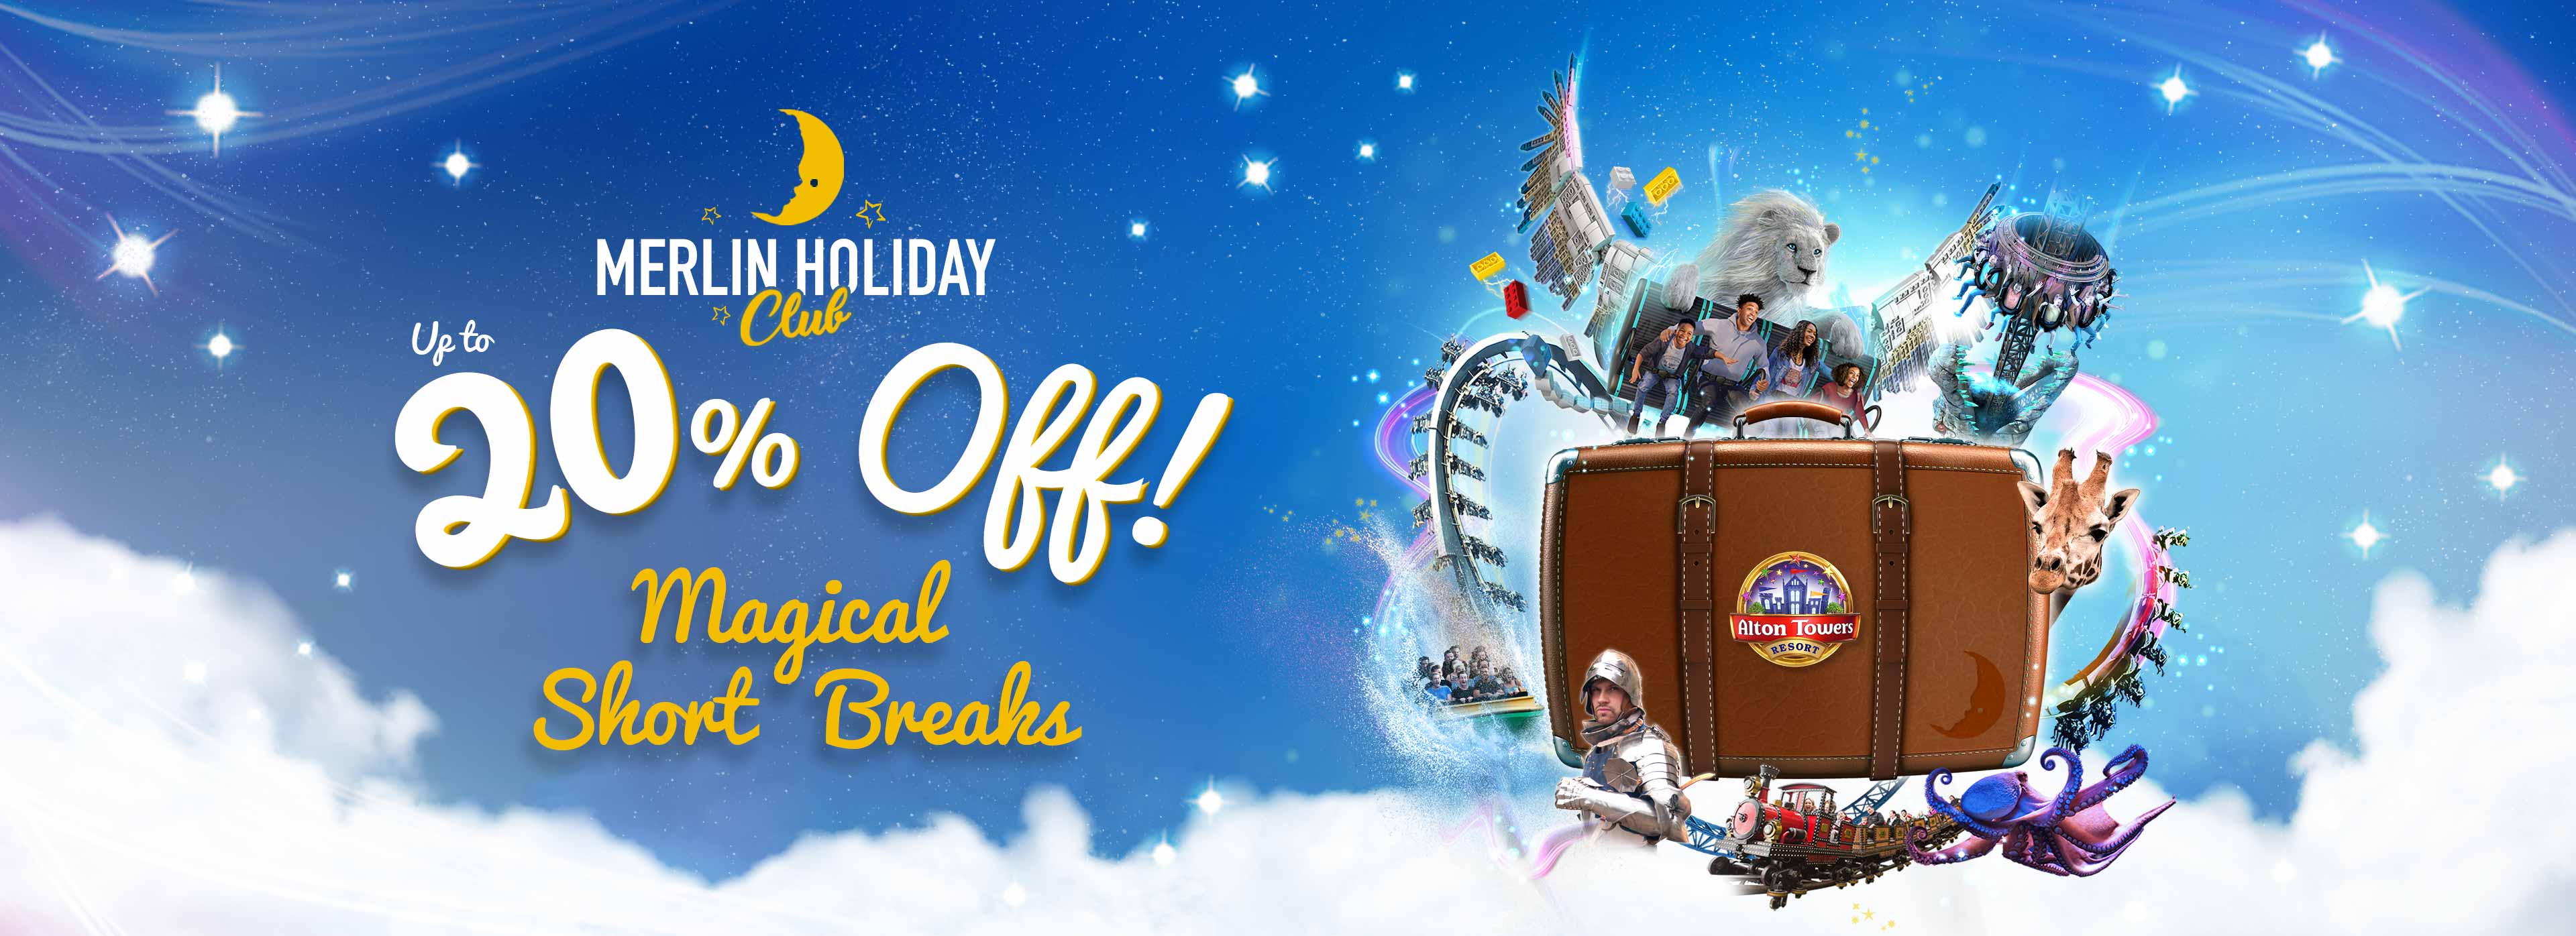 Save up to 20% on your Alton Towers short break with Merlin Holiday Club